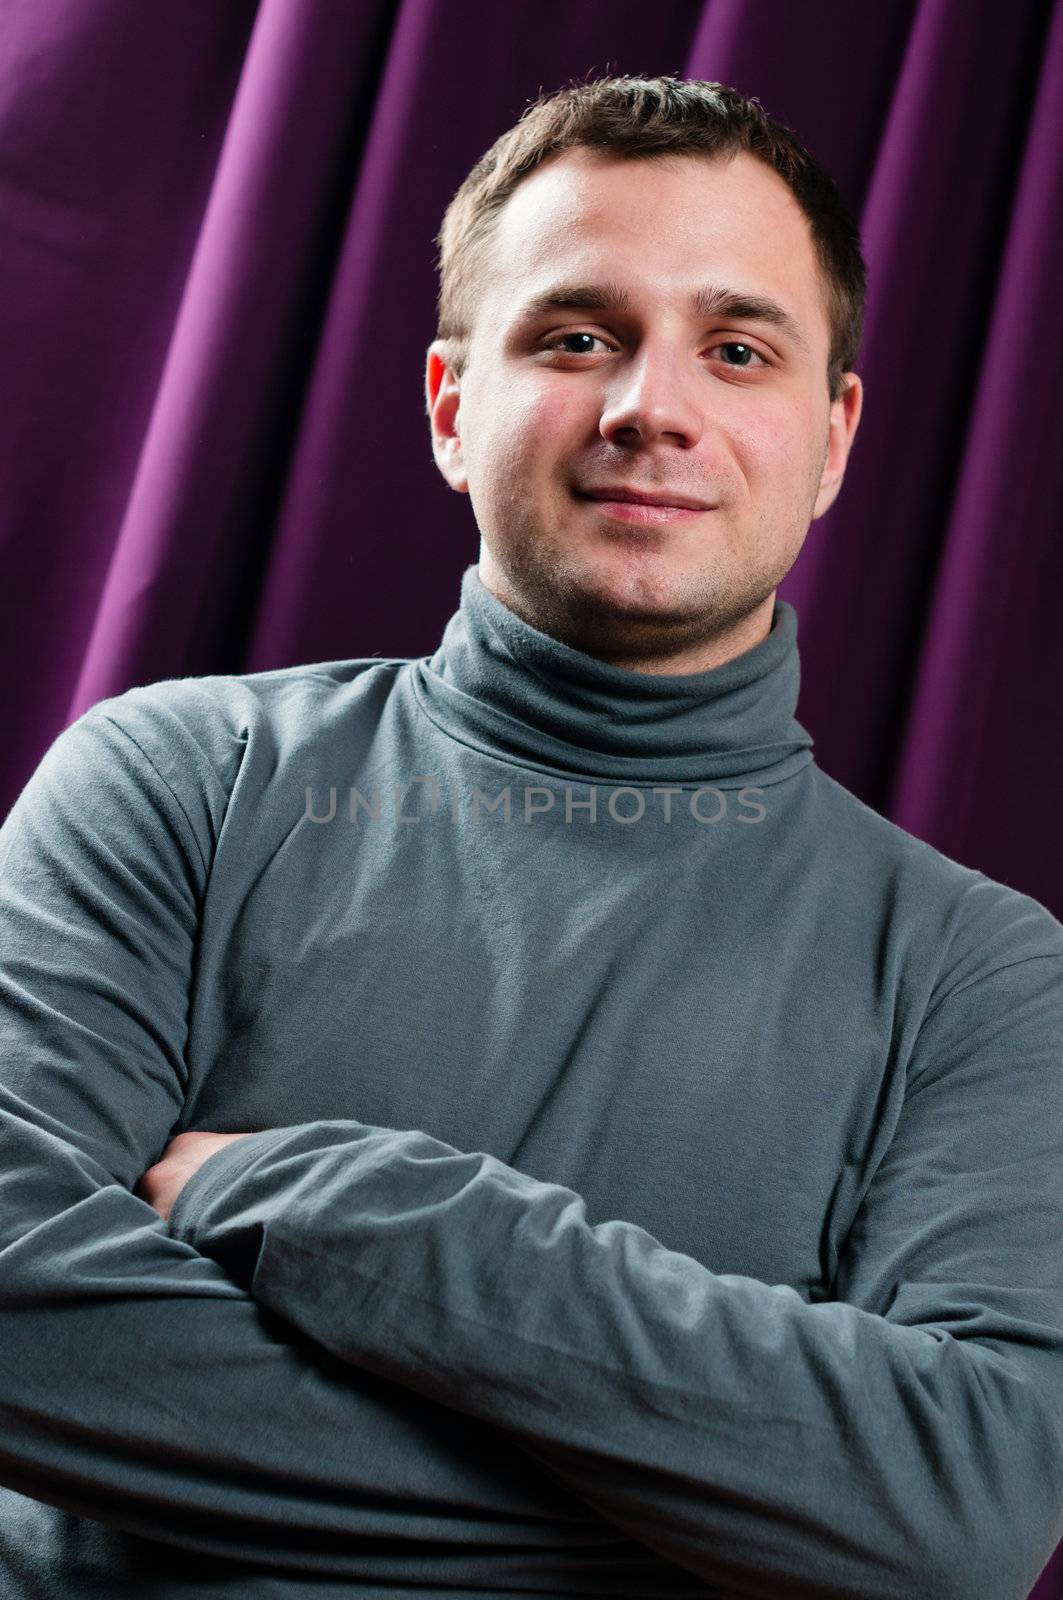 Man portrait with crossed arms with purple curtain on background